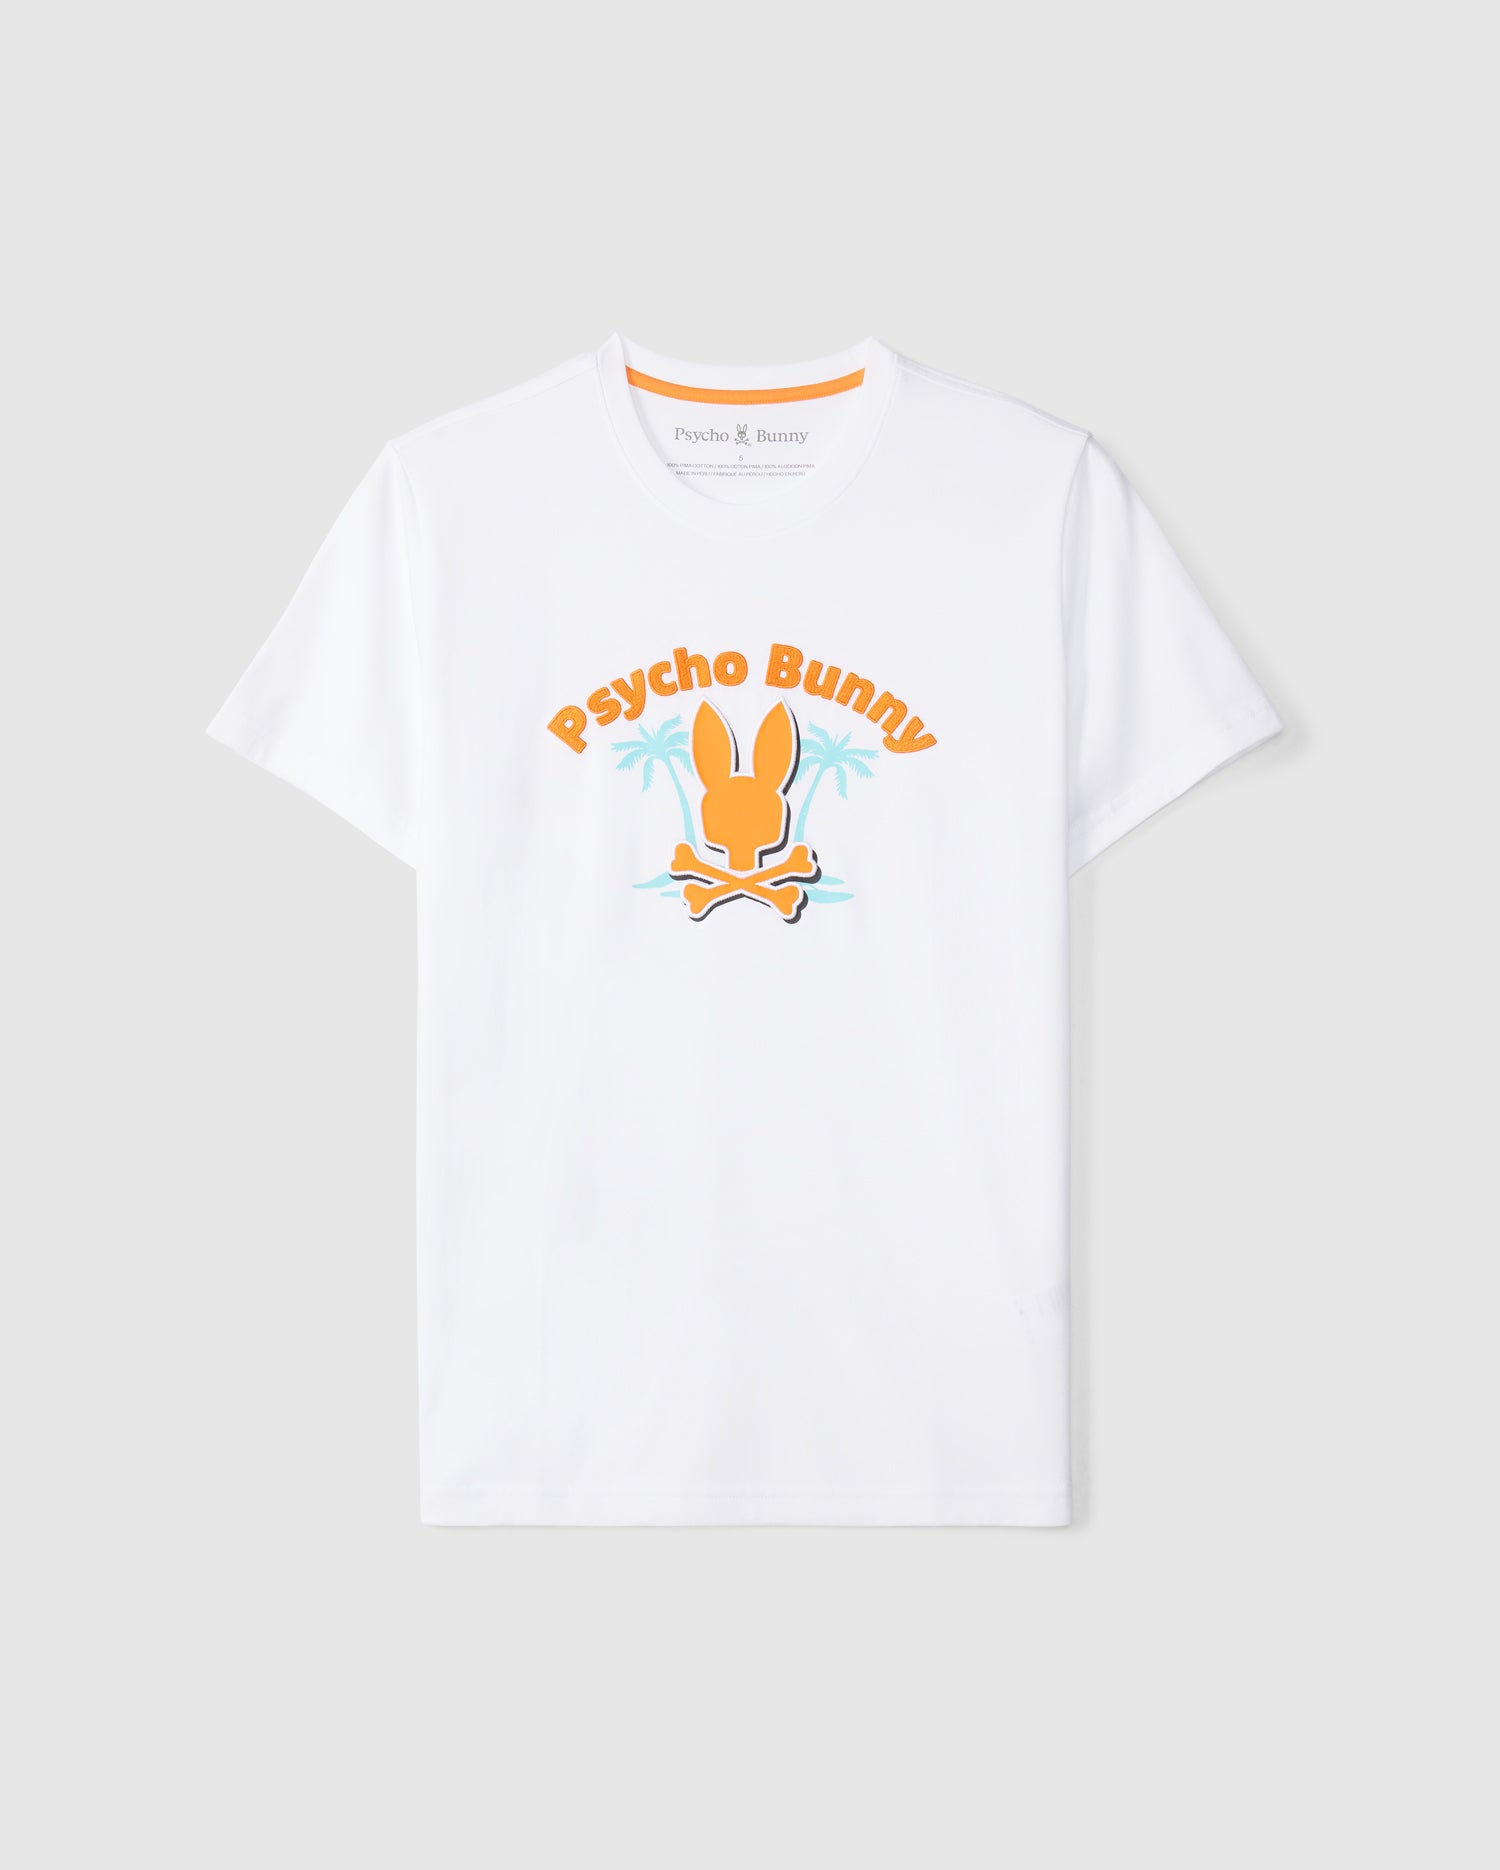 This MENS BOSTON GRAPHIC TEE - B6U573C200 by Psycho Bunny, made in Peru from luxurious Peruvian Pima cotton, features a vibrant graphic design with an orange bunny and crossed bones below it. The text 